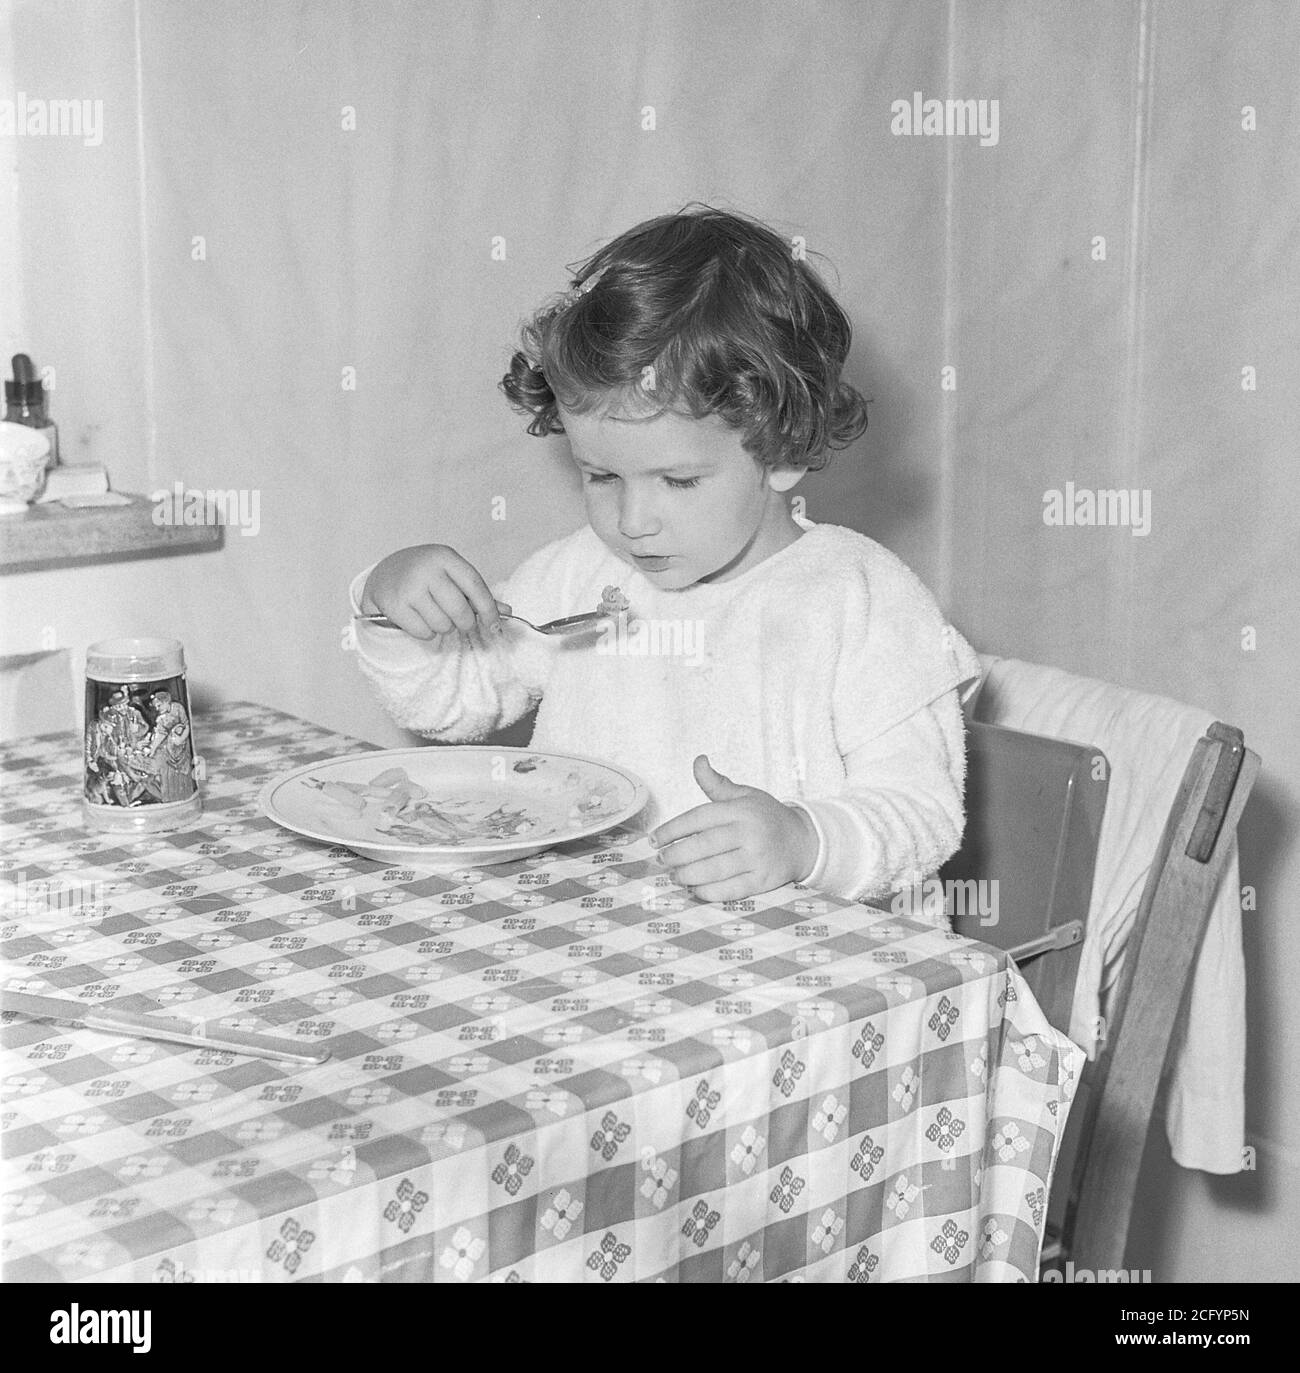 Toddler eating at kitchen table, 1950s, USA Stock Photo